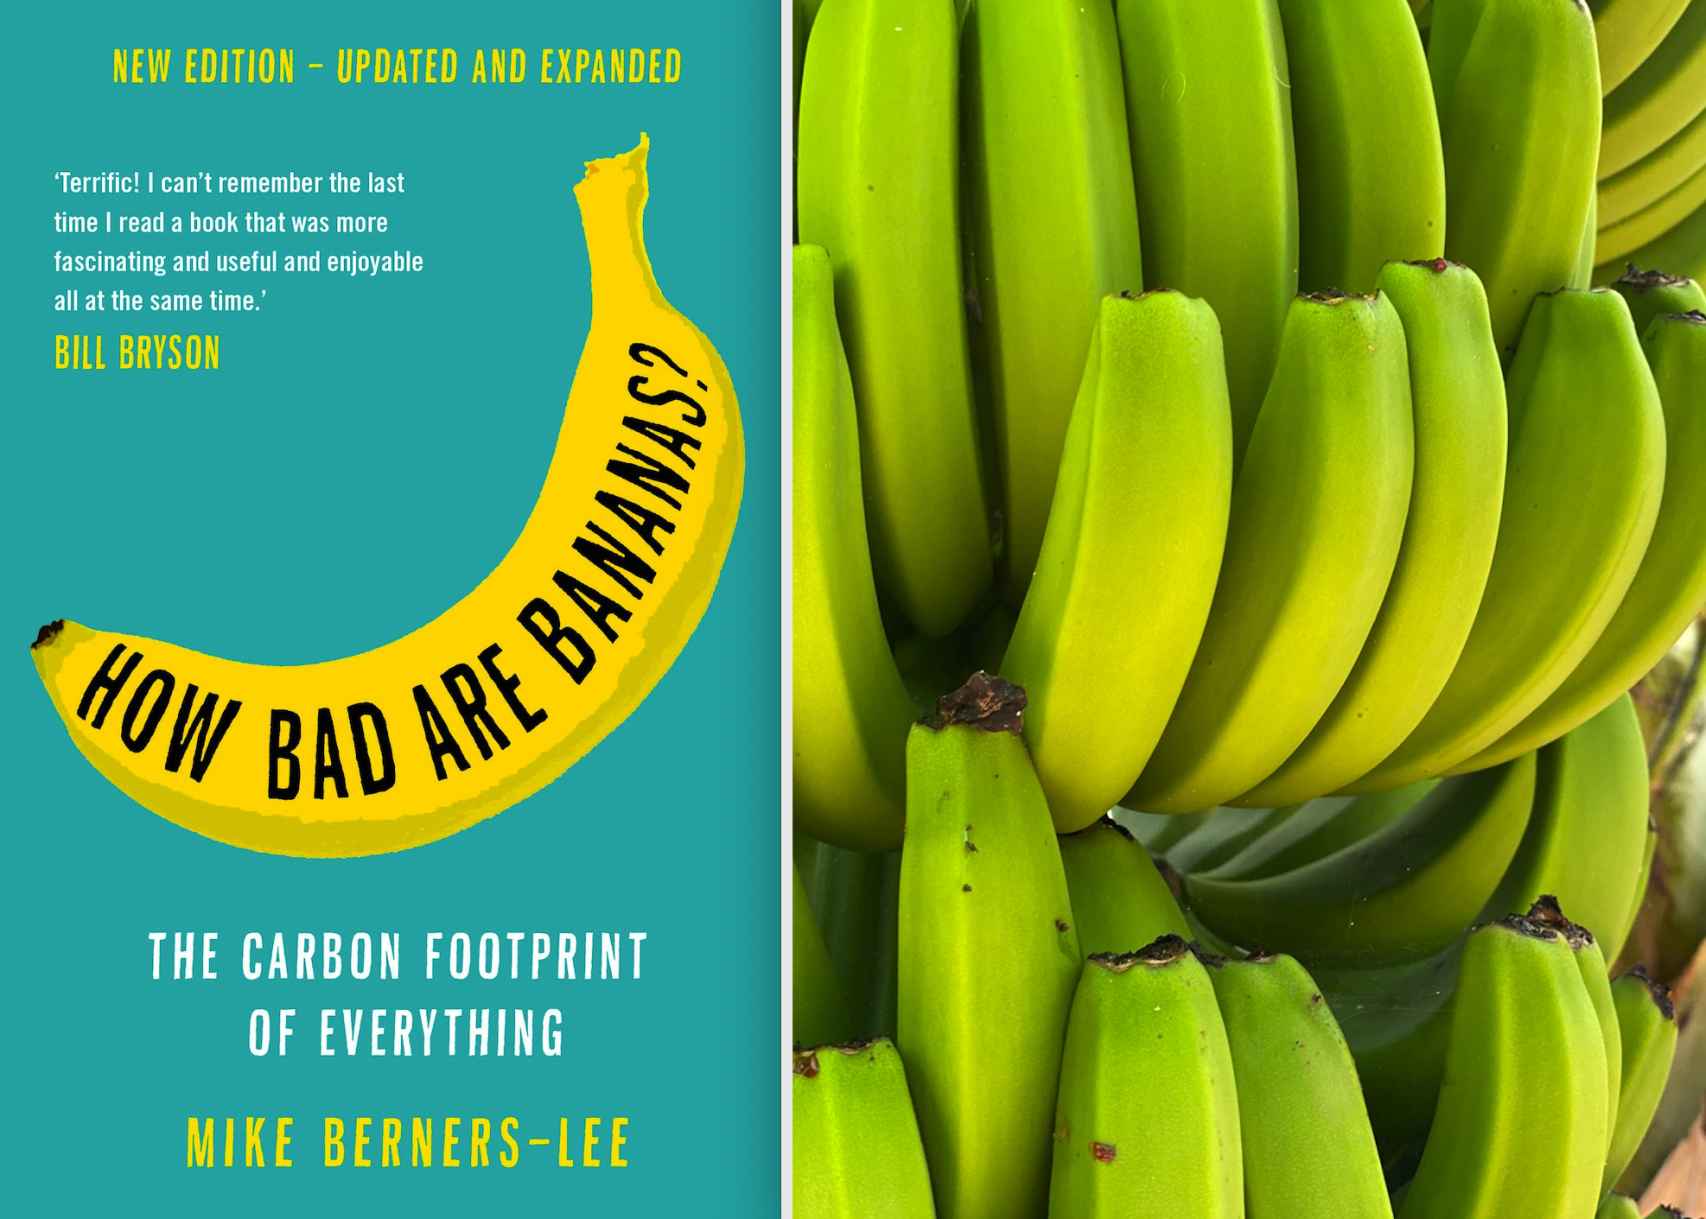 “How Bad Are Bananas, The Carbon Foot Print of everything”, de Mike Berners-Lee.